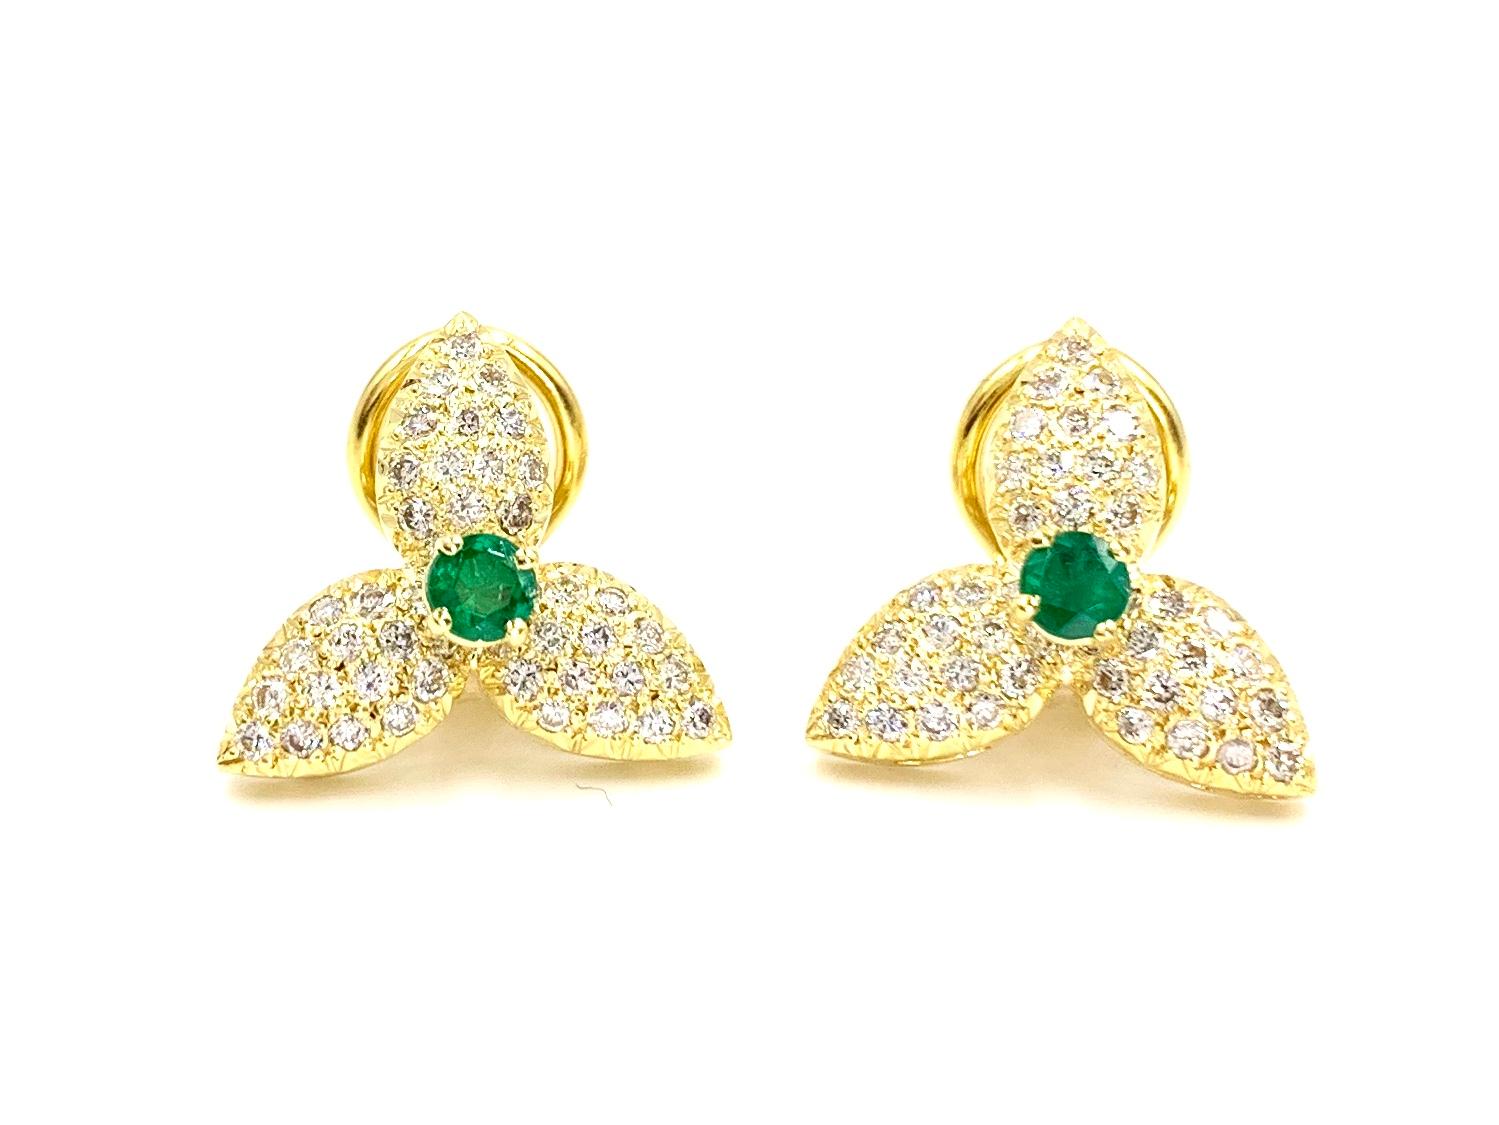 Beautiful and wearable 18 karat yellow gold clip-on stud style floral earrings featuring pave set round diamonds on the petals and a vivid green emerald center. Earrings have a total diamond weight of 1.14 at approximately F color, VS2 clarity. Two